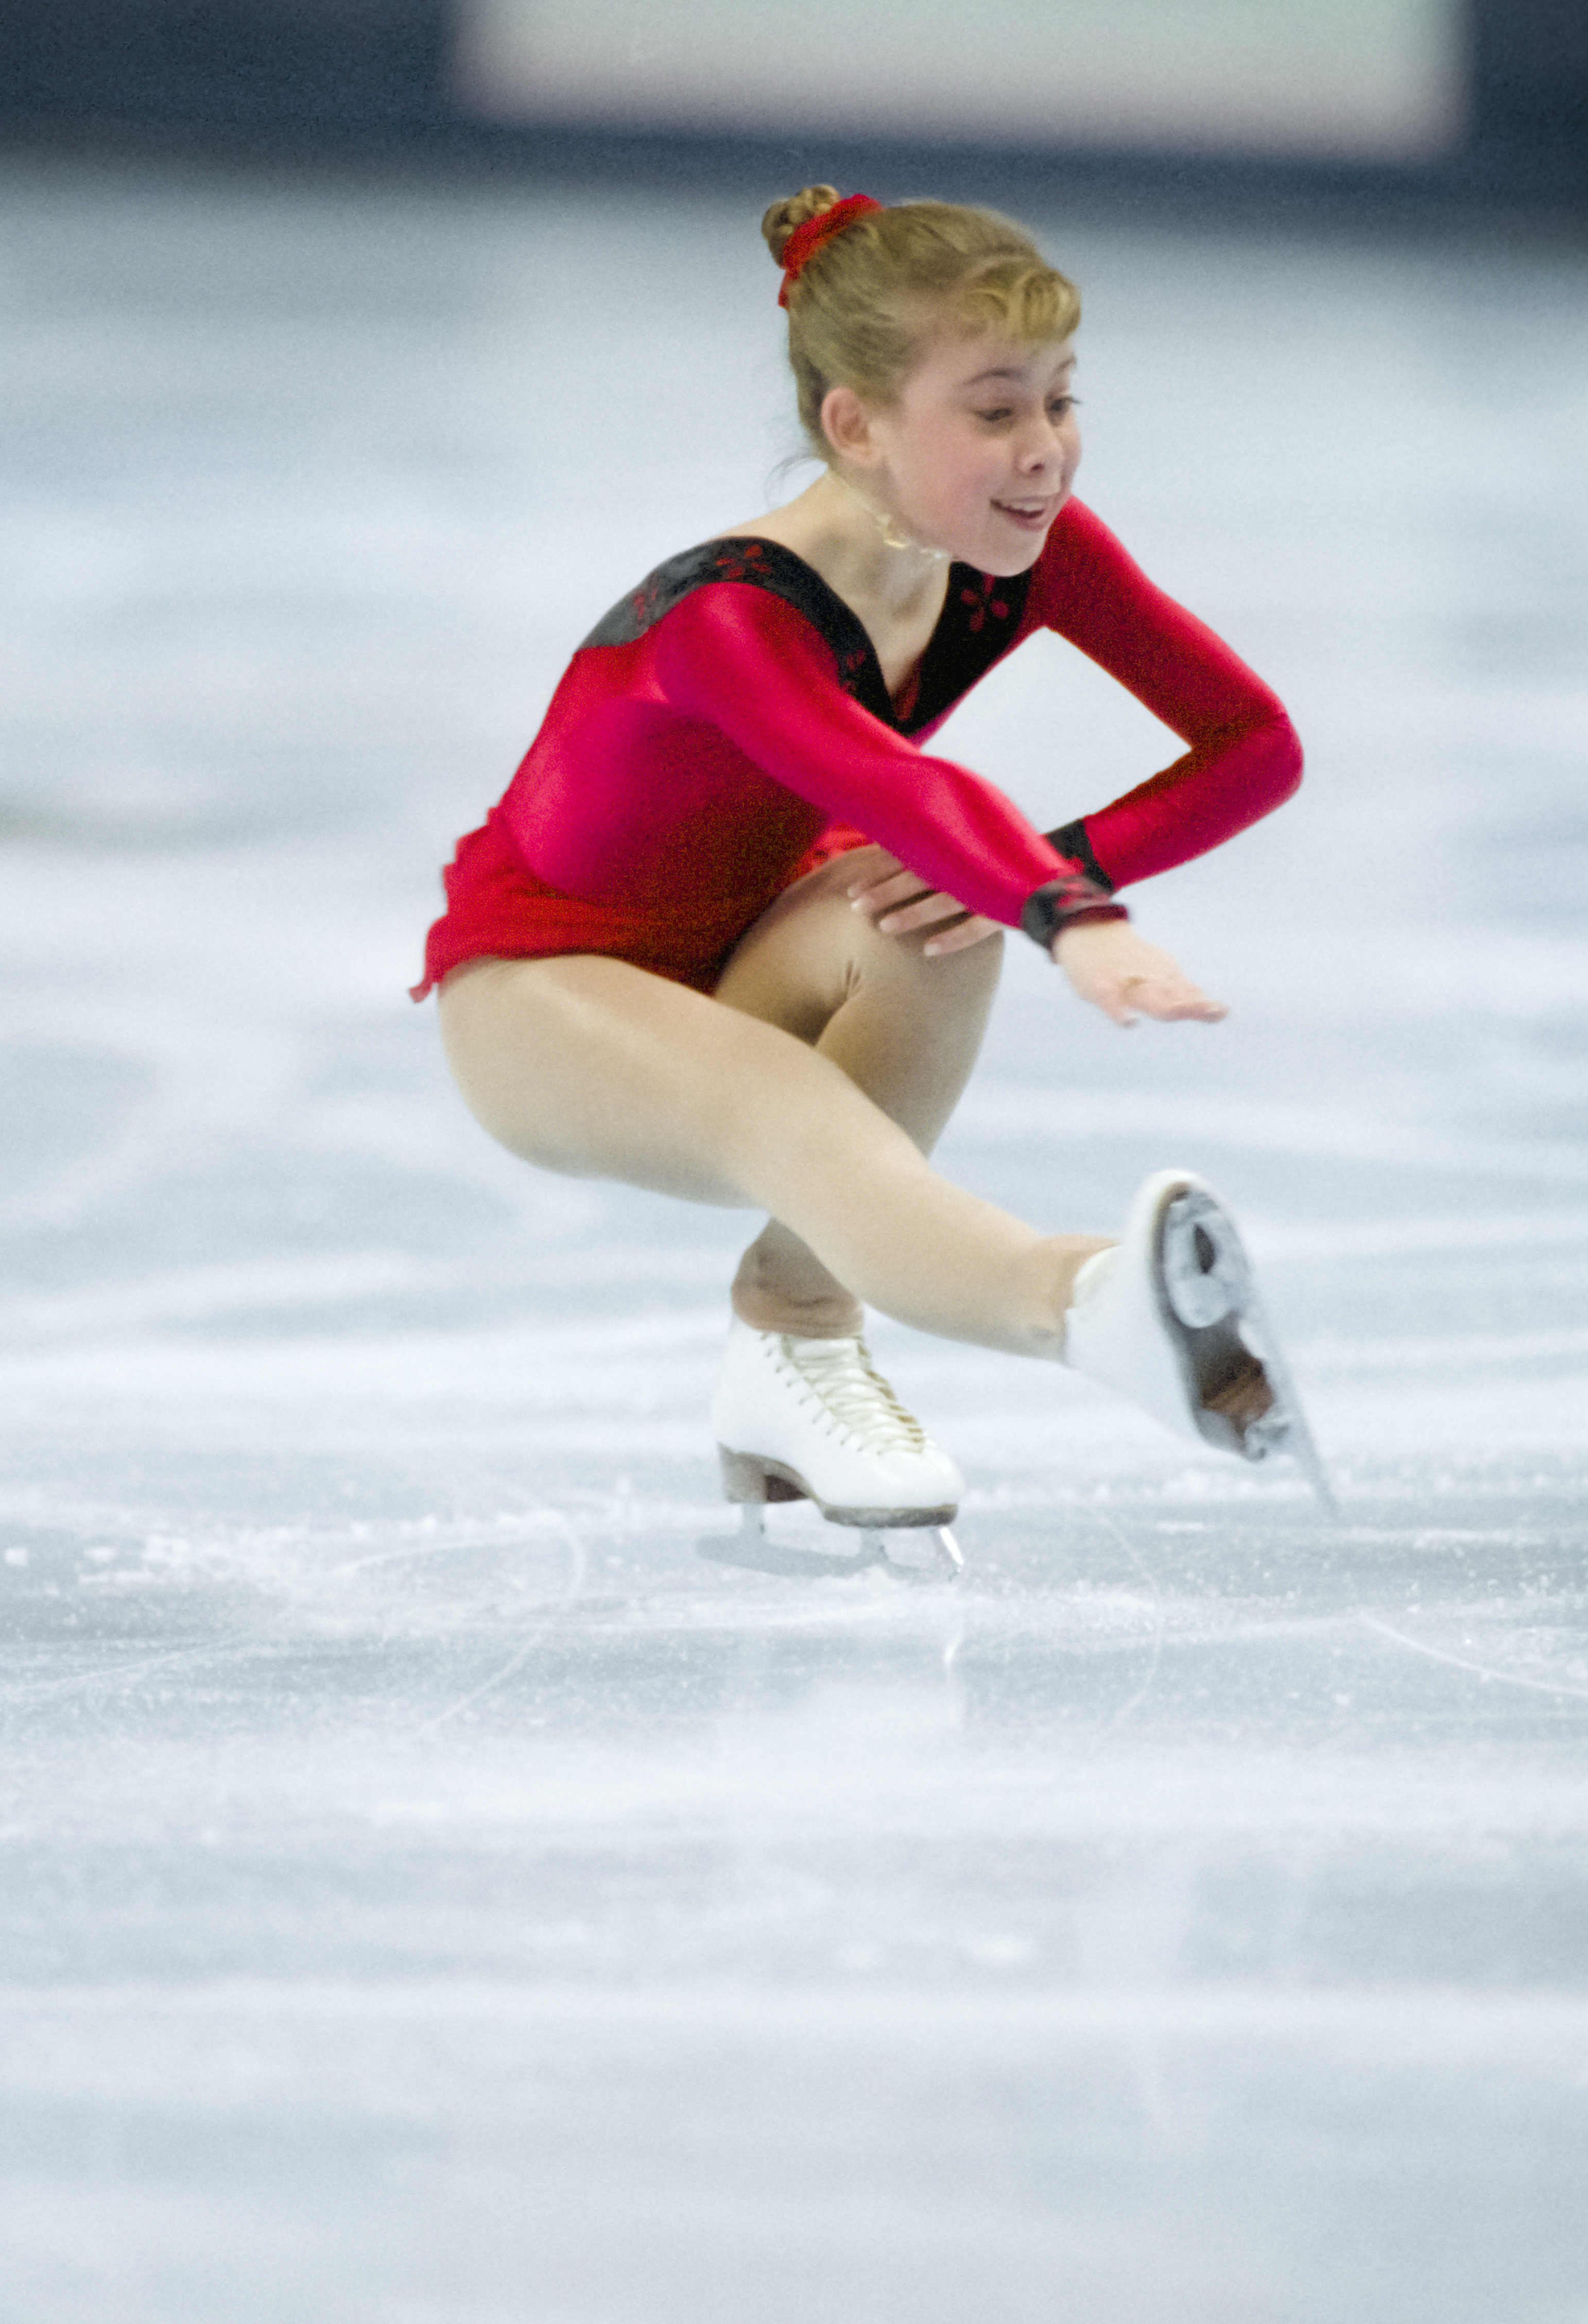 Tara Lipinski dazzles in the Free Skate segment of the Ladies' Singles competition at the 1996 United States Figure Skating Championships, on January 21, 1996, in San Jose, California | Source: Getty Images